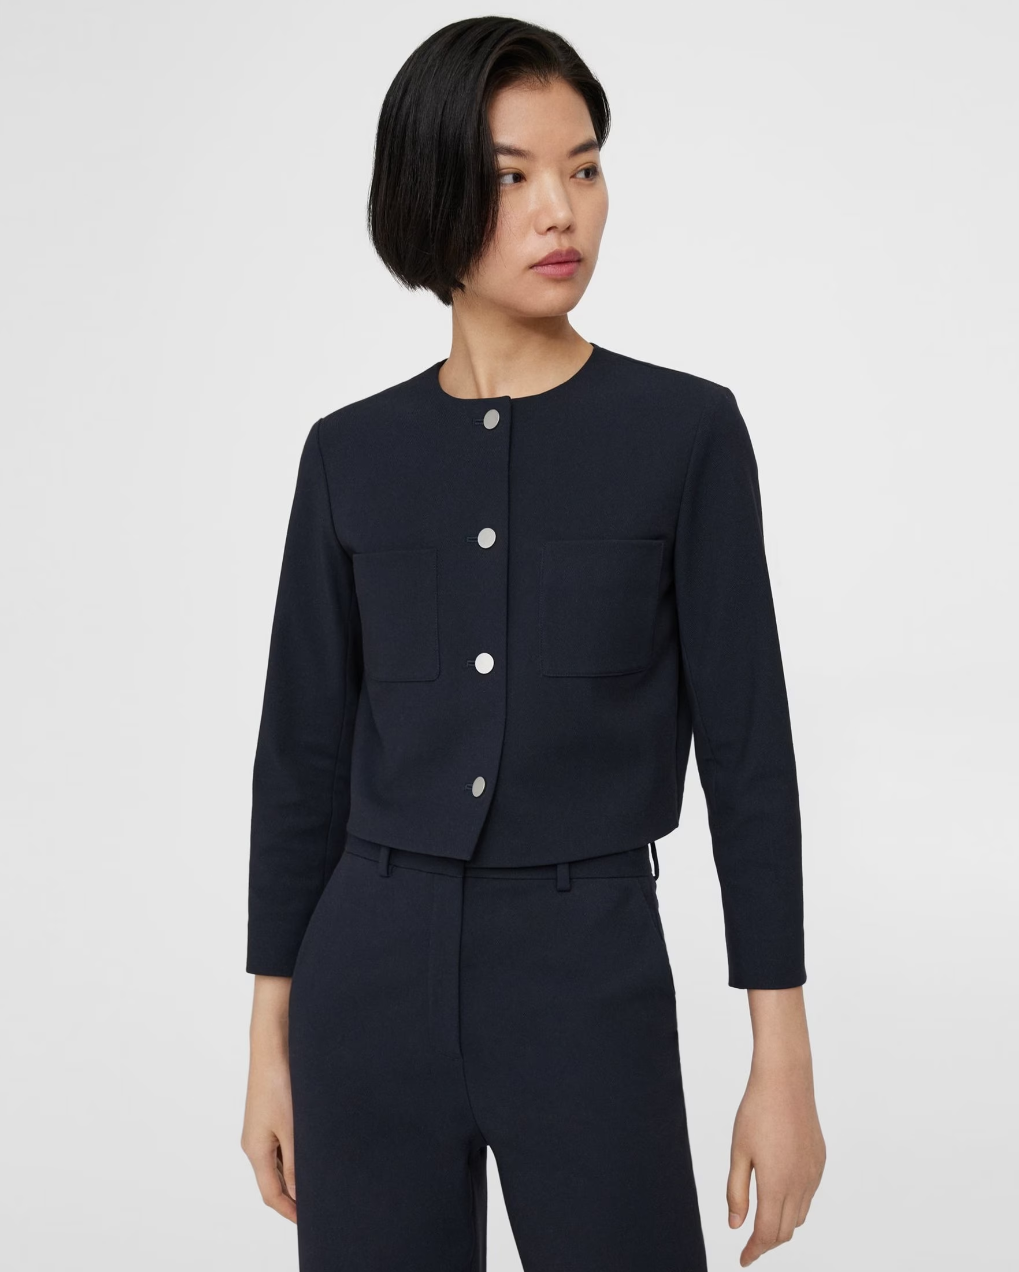 Theory Cropped Jacket in Neoteric Twill - Garbarini